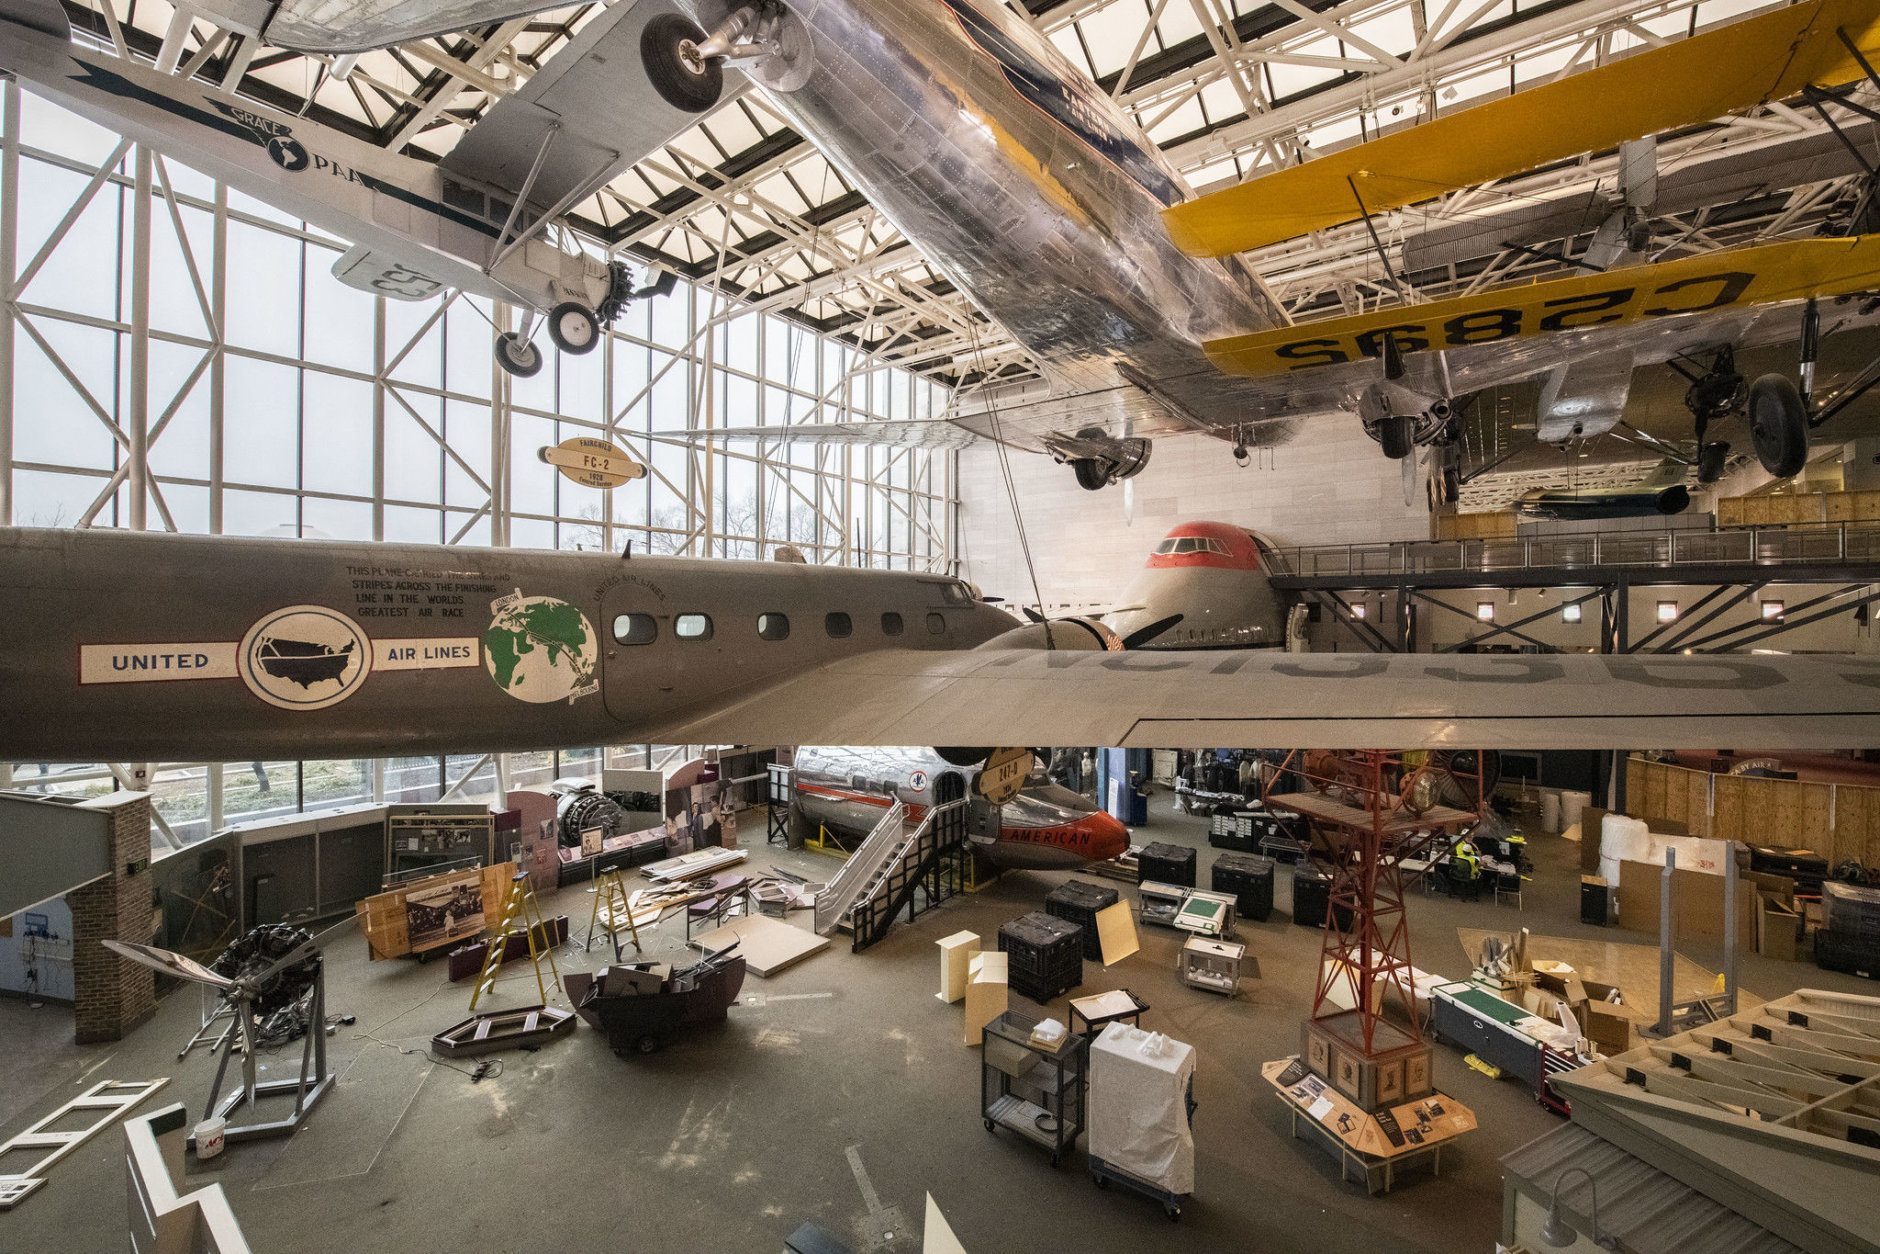 Revitalization work in the closed off America by Air gallery of the Smithsonian Air and Space museum in Washington, DC, February 12, 2019. (Smithsonian  photo by Jim Preston)  Material is subject to Smithsonian Terms of Use. Should you wish to use National Air and Space material in any medium, please submit an Application for Permission to Reproduce NASM Material, available at:  https://airandspace.si.edu/permissions